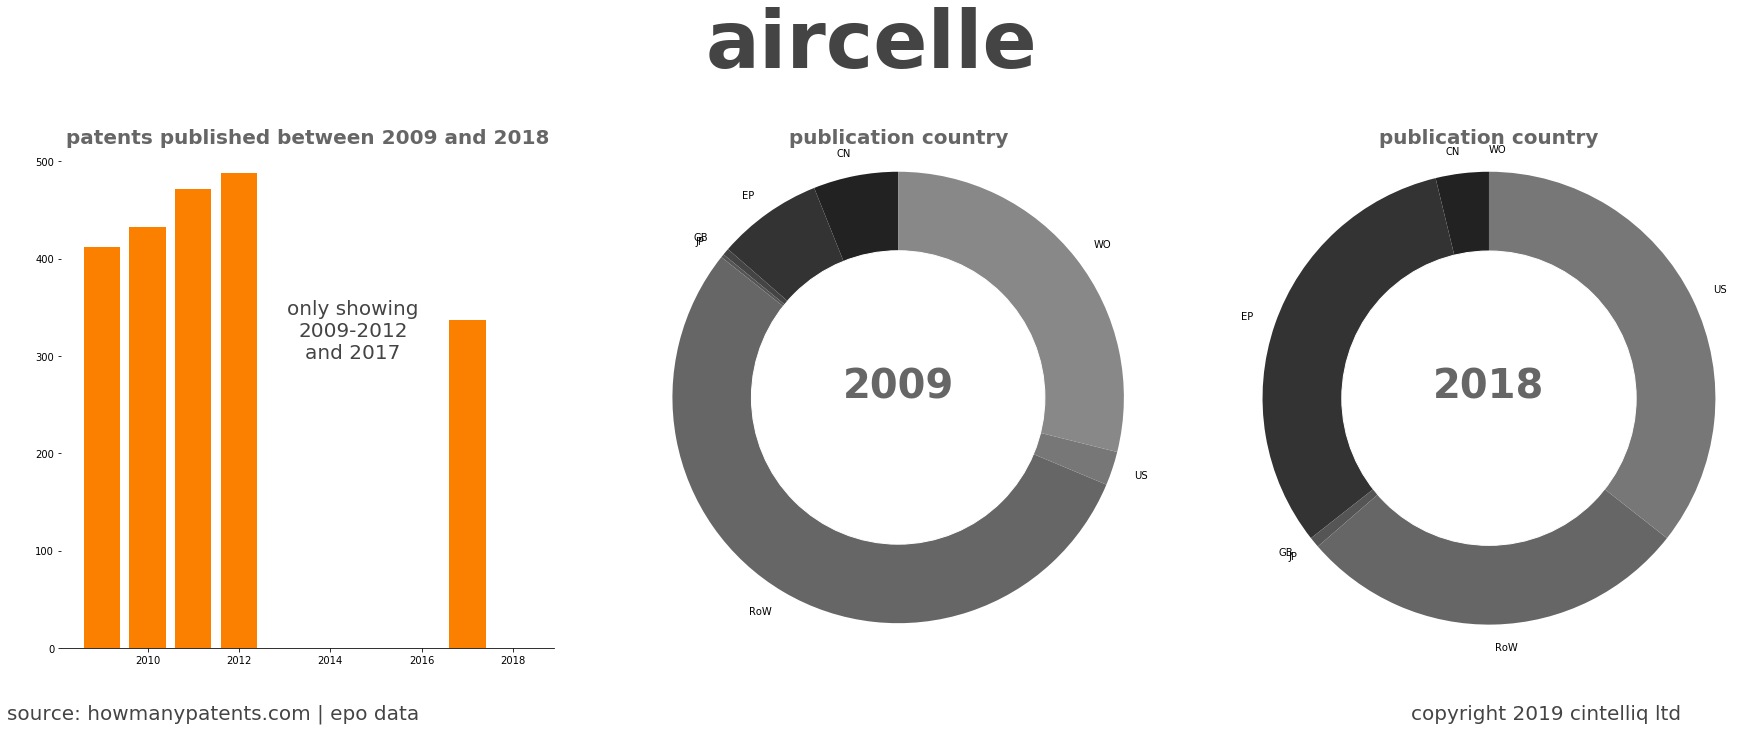 summary of patents for Aircelle